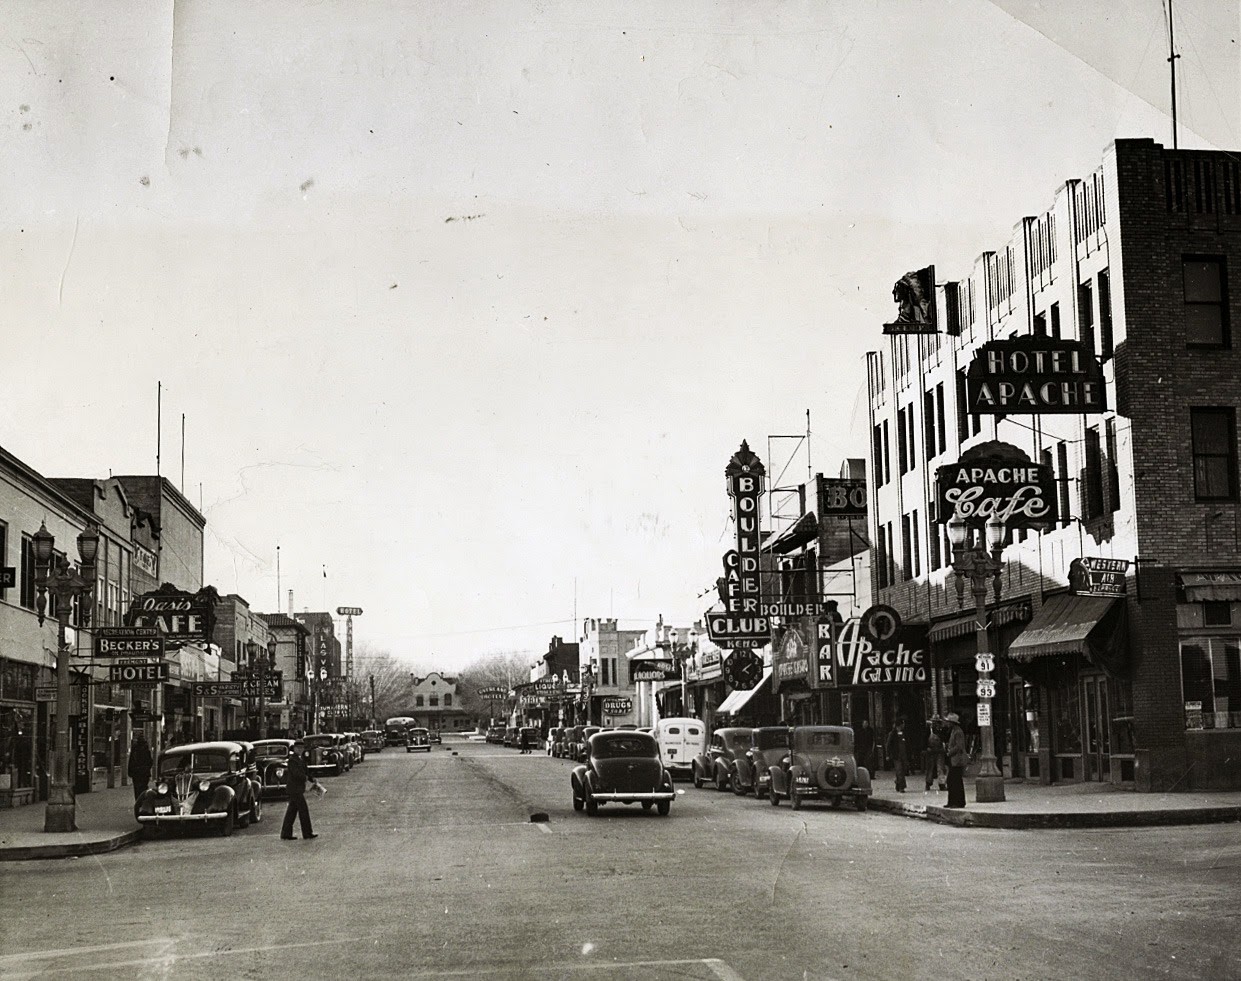 Vintage Photos Of Downtown Las Vegas From The 1930s And 1940s Vintage Everyday